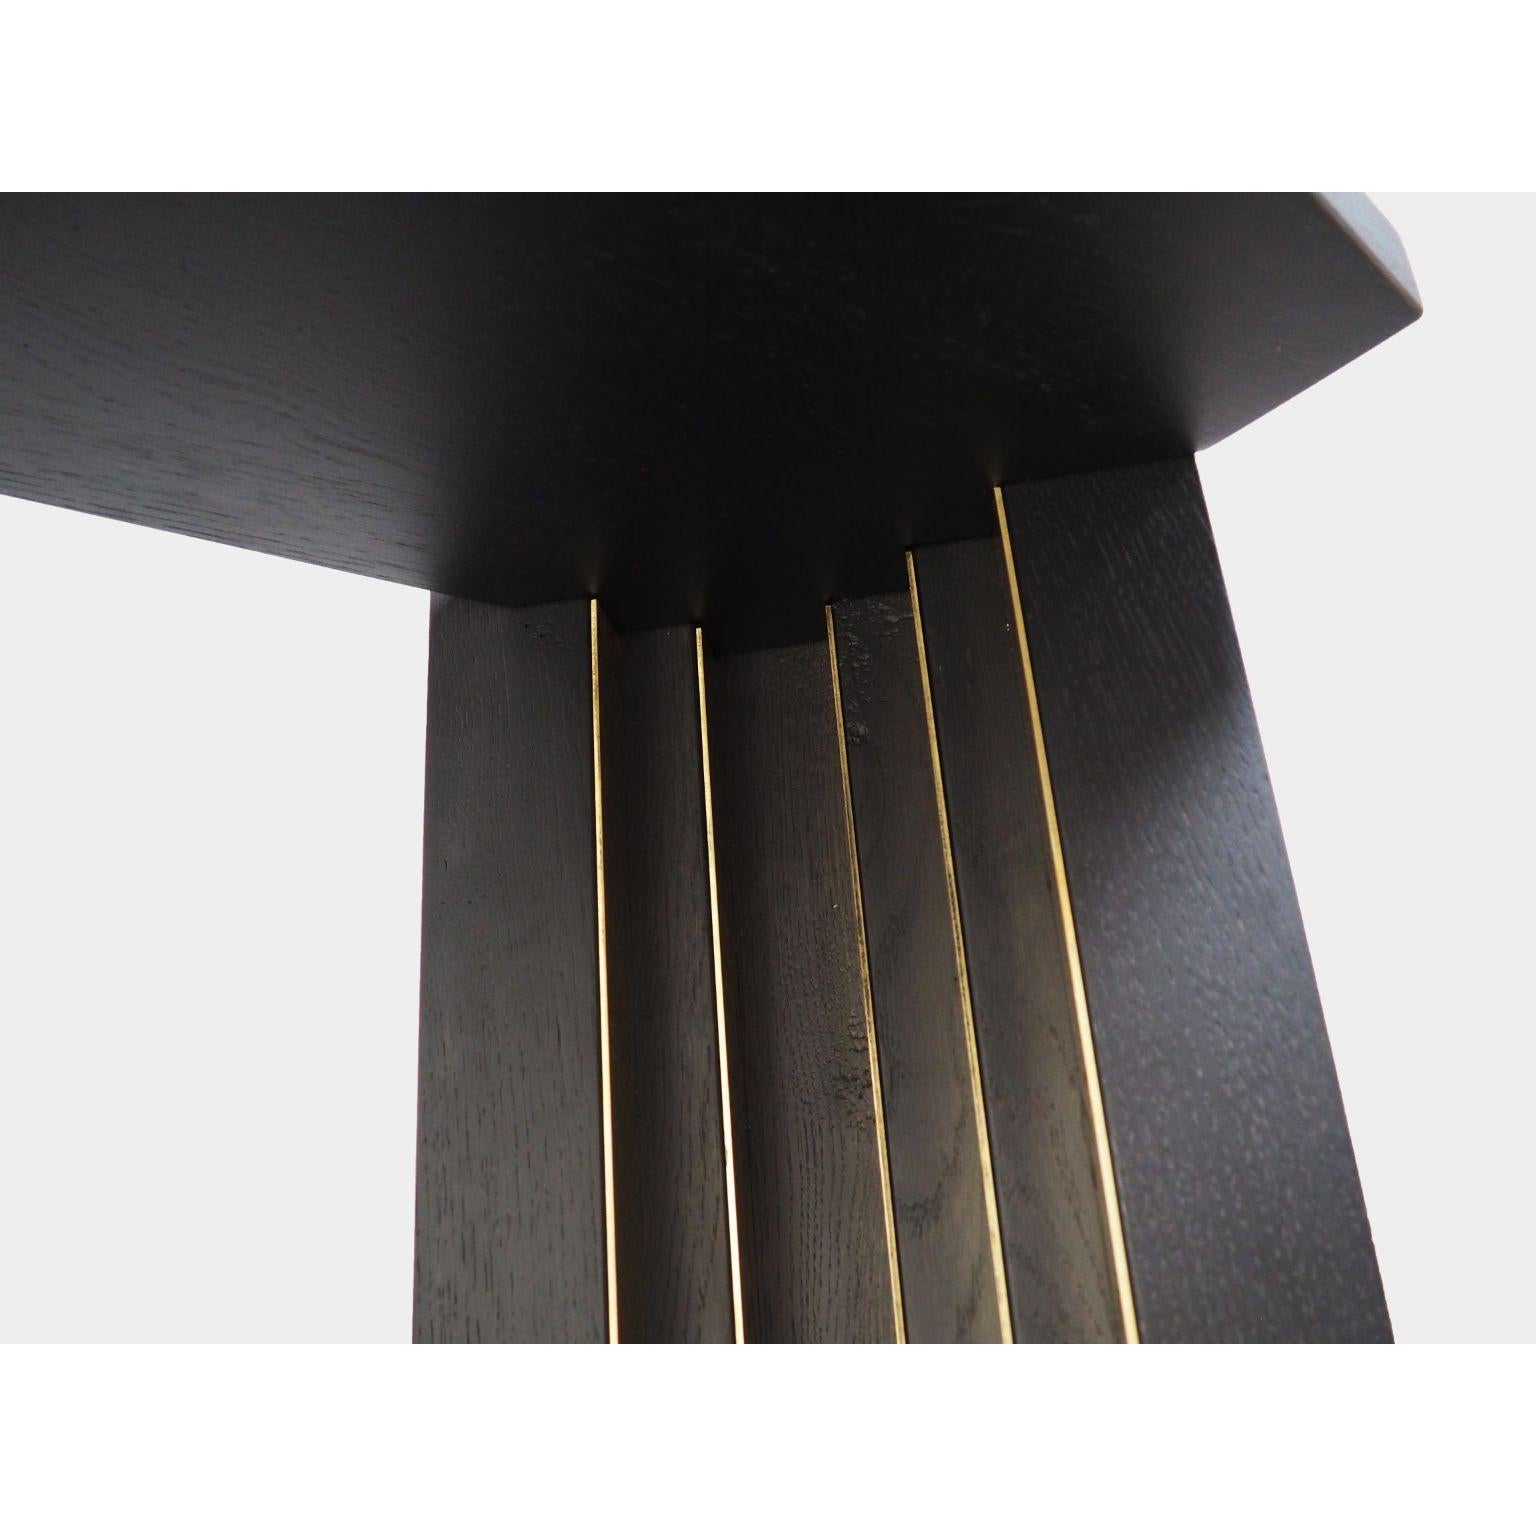 English Console in Black and Gold by Dessislava Madanska For Sale